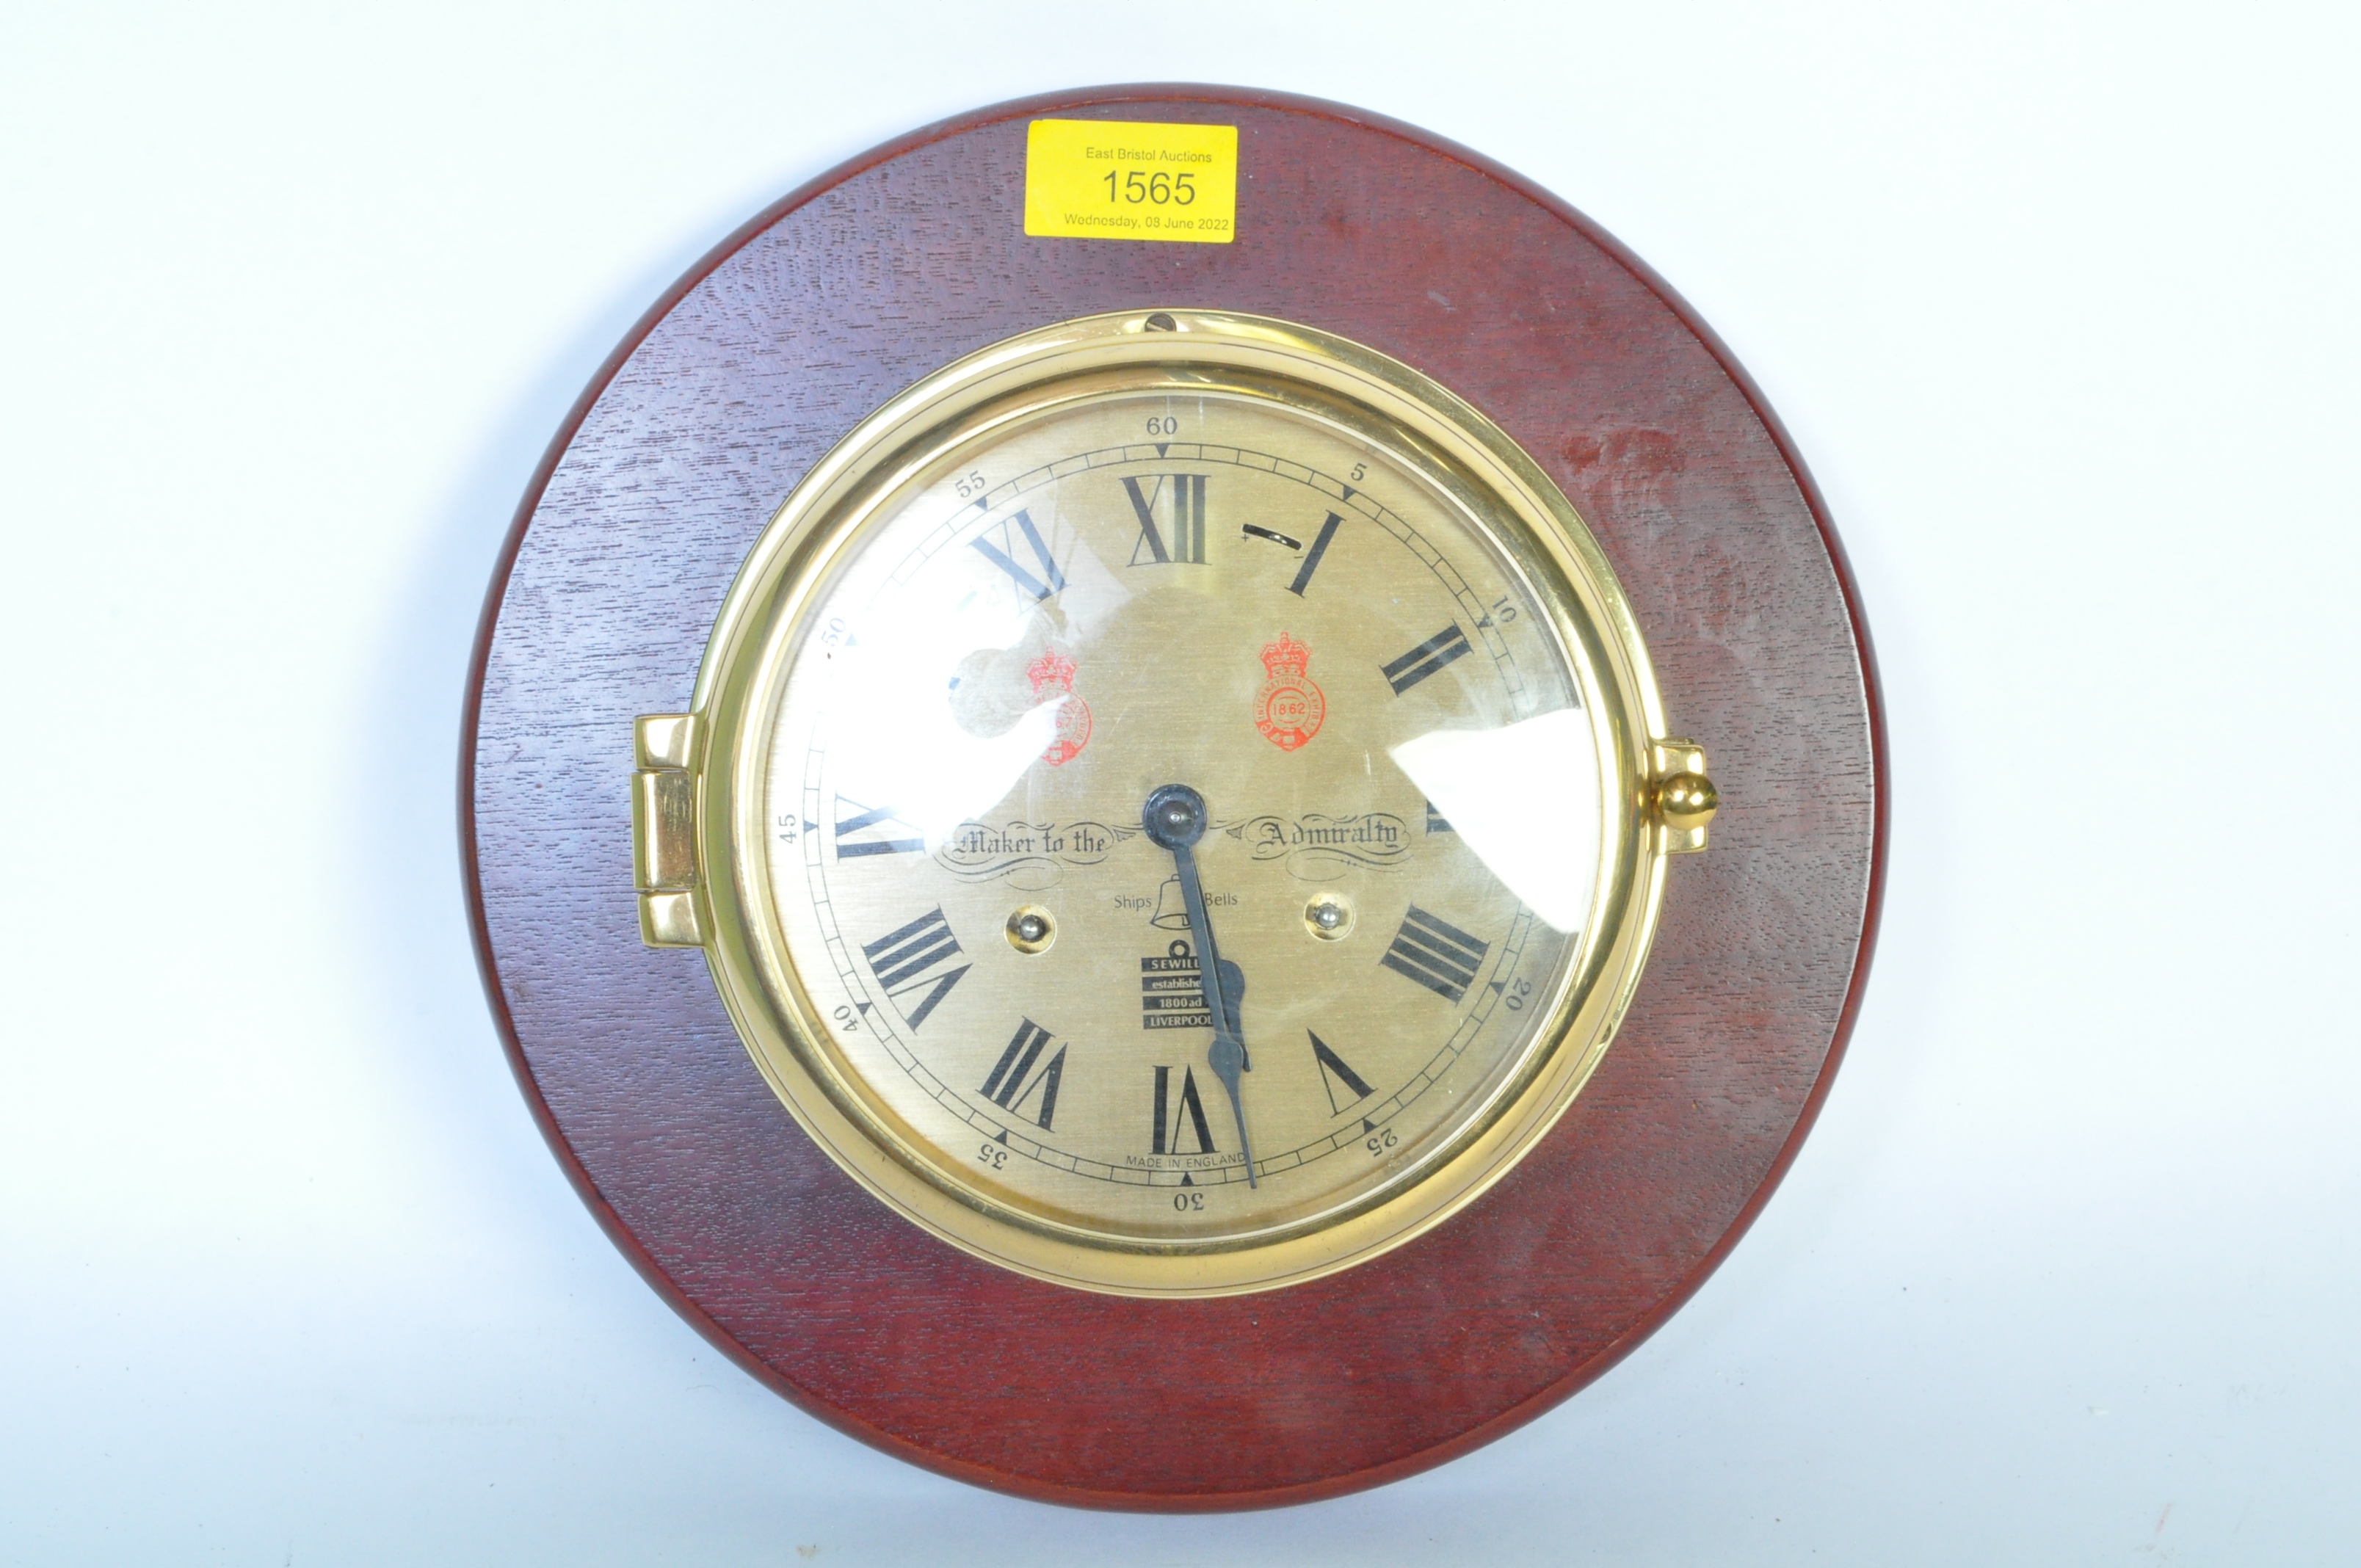 SEWILLS OF LIVERPOOL ROYAL ADMIRALTY SHIPS CLOCK - Image 3 of 6